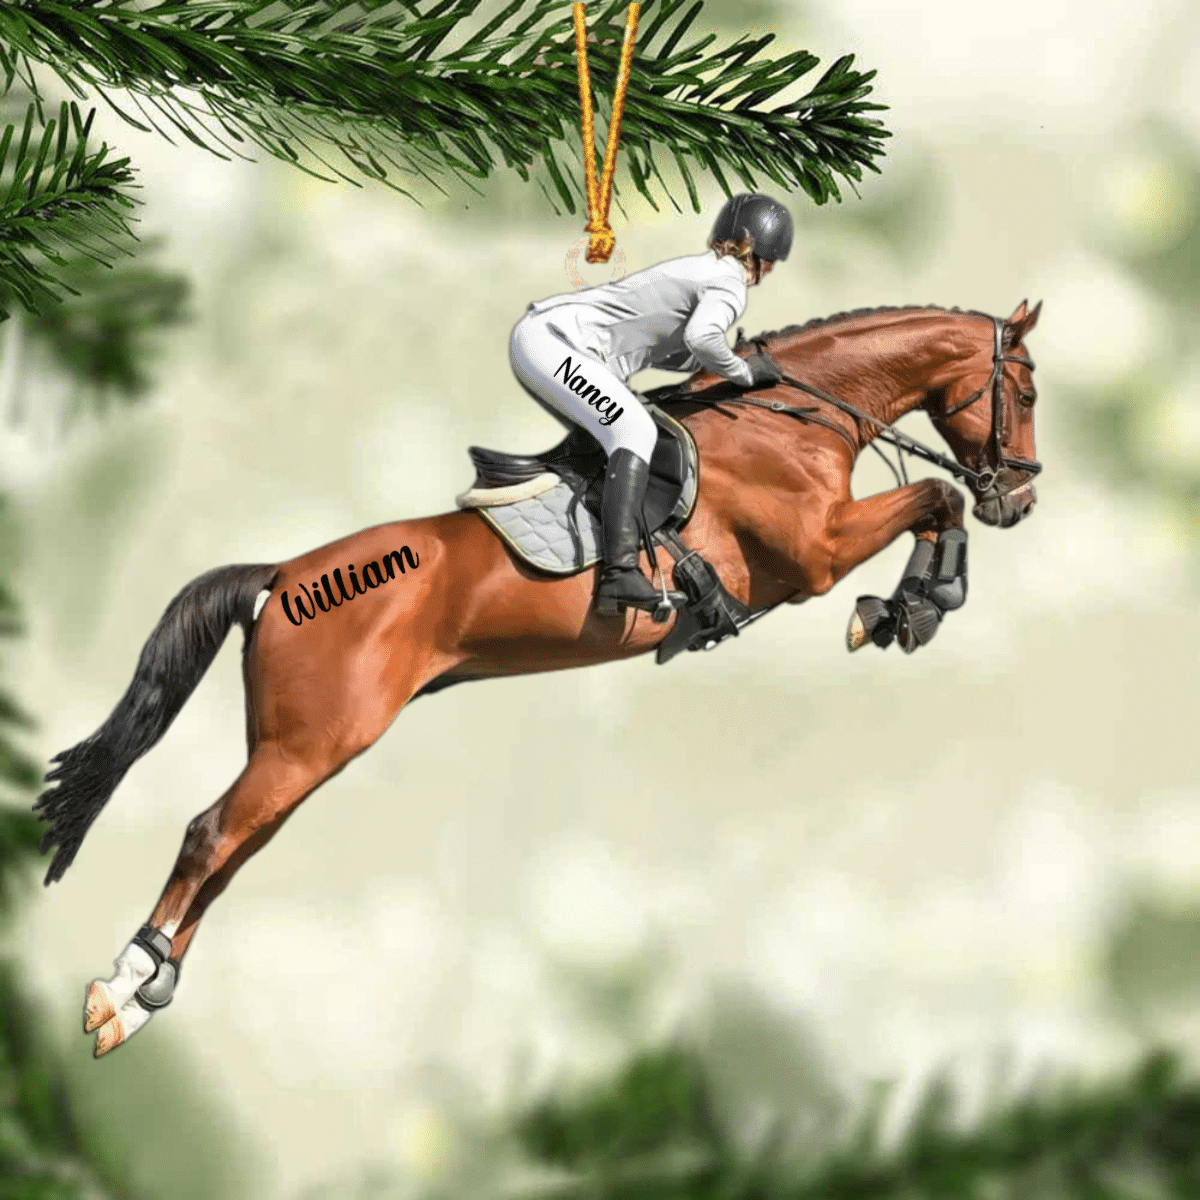 Personalized Equestrian Girl Ornament - Gift Idea For Horse Lover/ Christmas